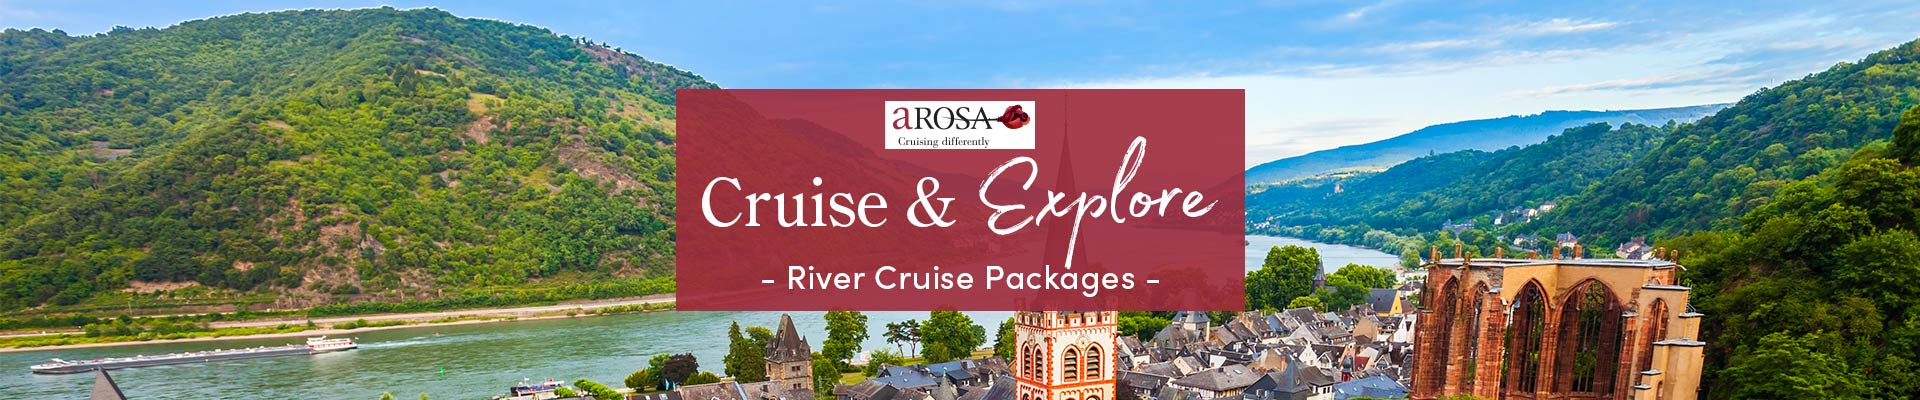 A-ROSA River Cruise & Explore Packages